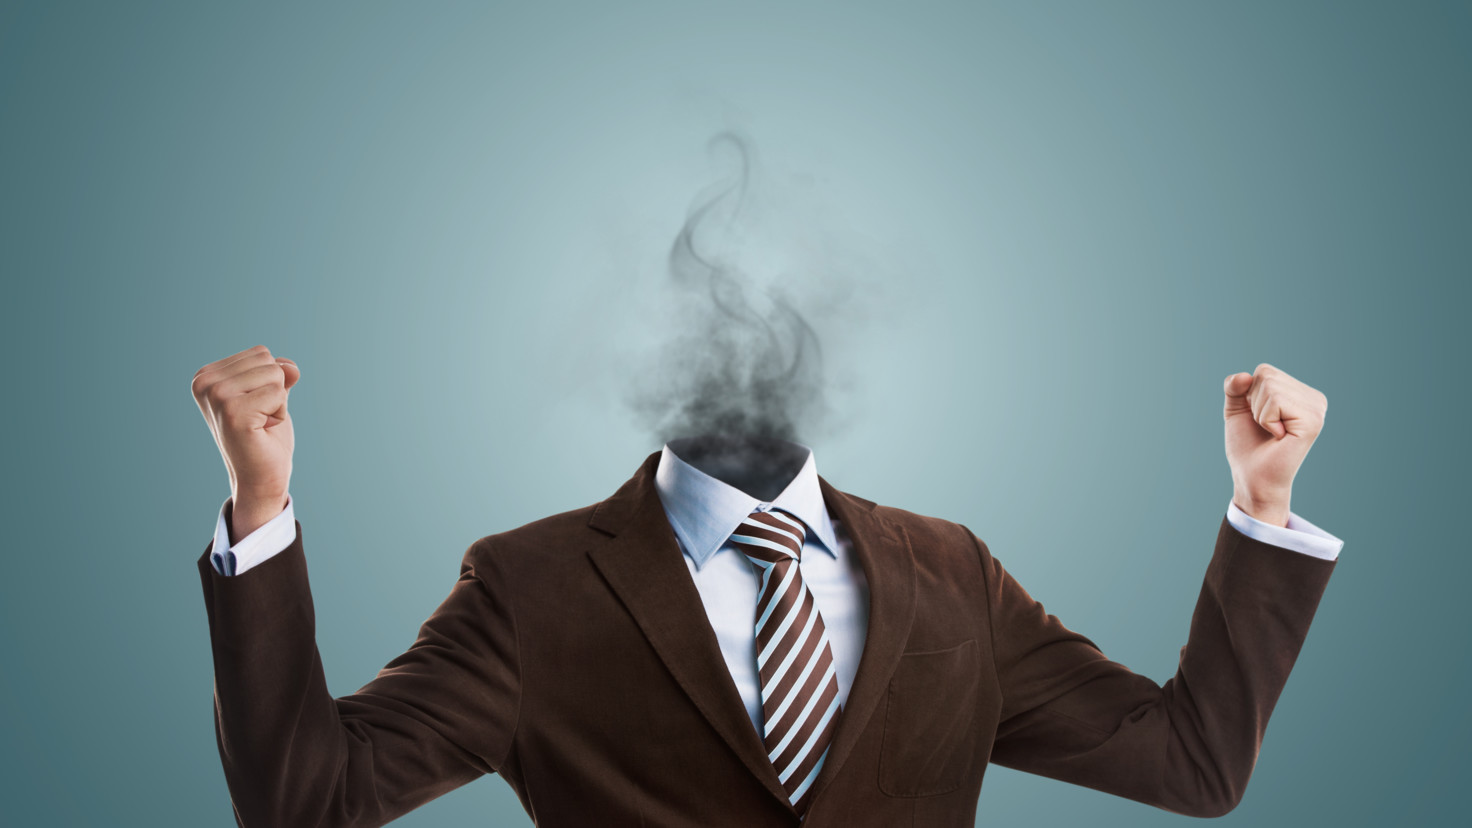 A trader is shown with smoke replacing his head to illustrate losing his cool during trading